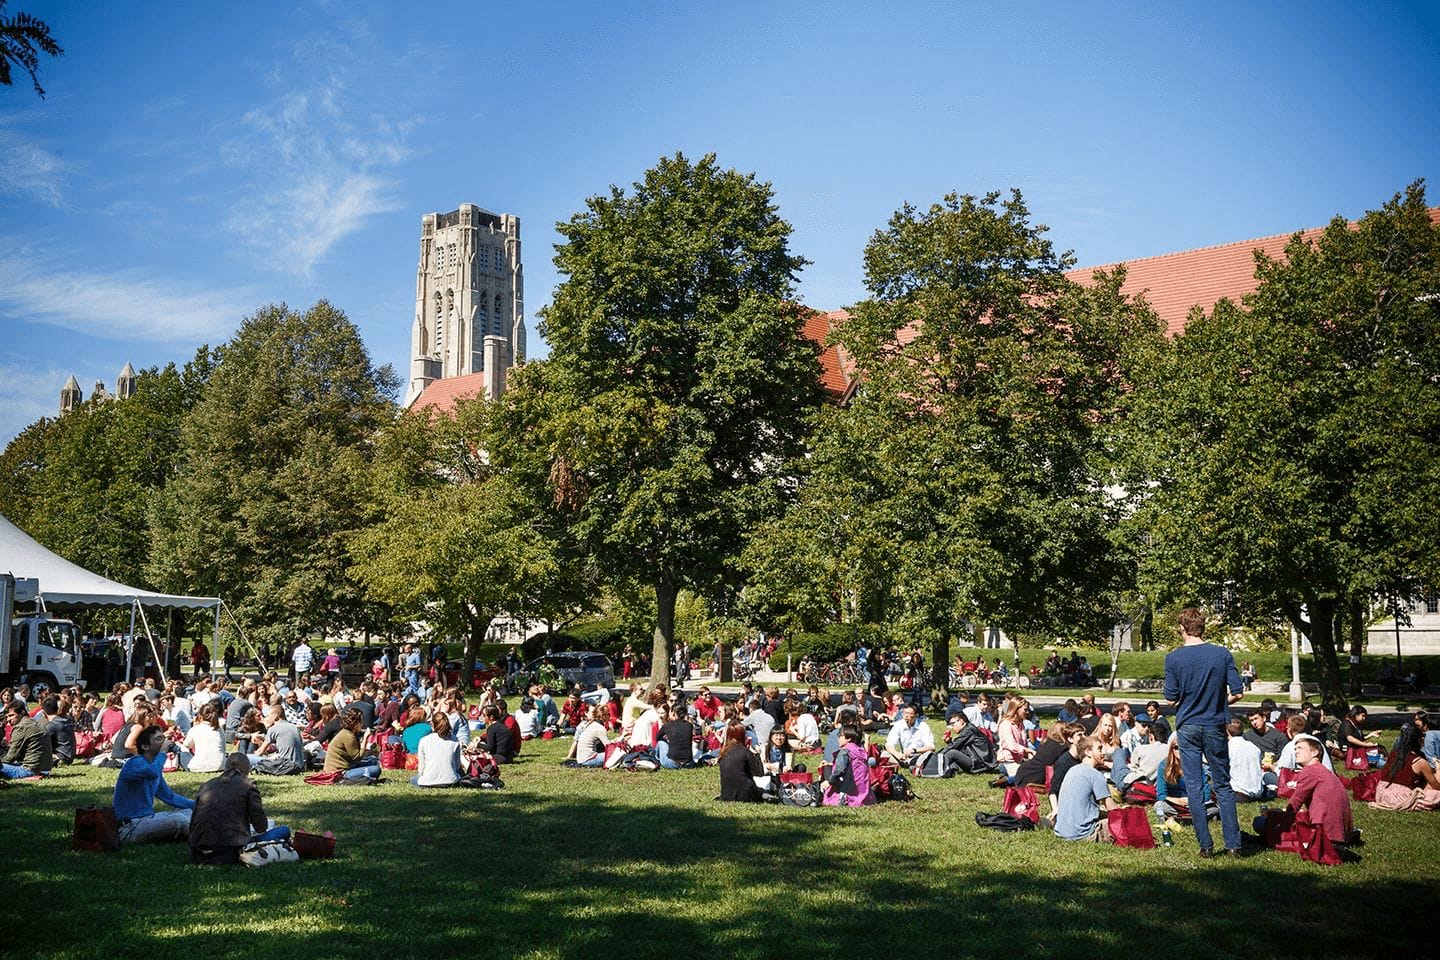 Students sitting on the University of Chicago campus lawn